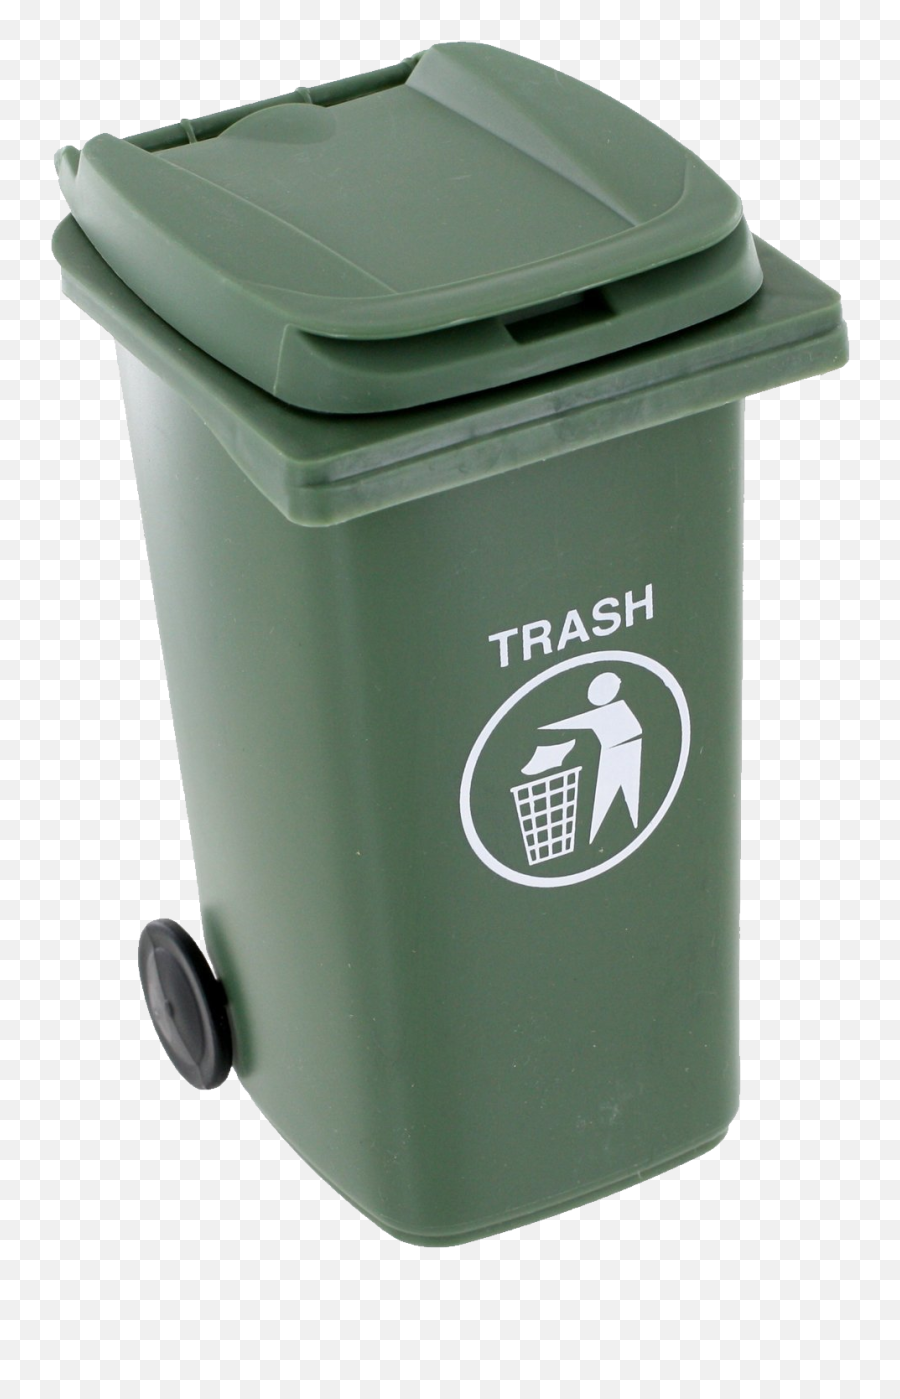 Waste Container Recycling Bin Plastic - Trash And Recycling Bin Emoji,Trash Bin Emoji